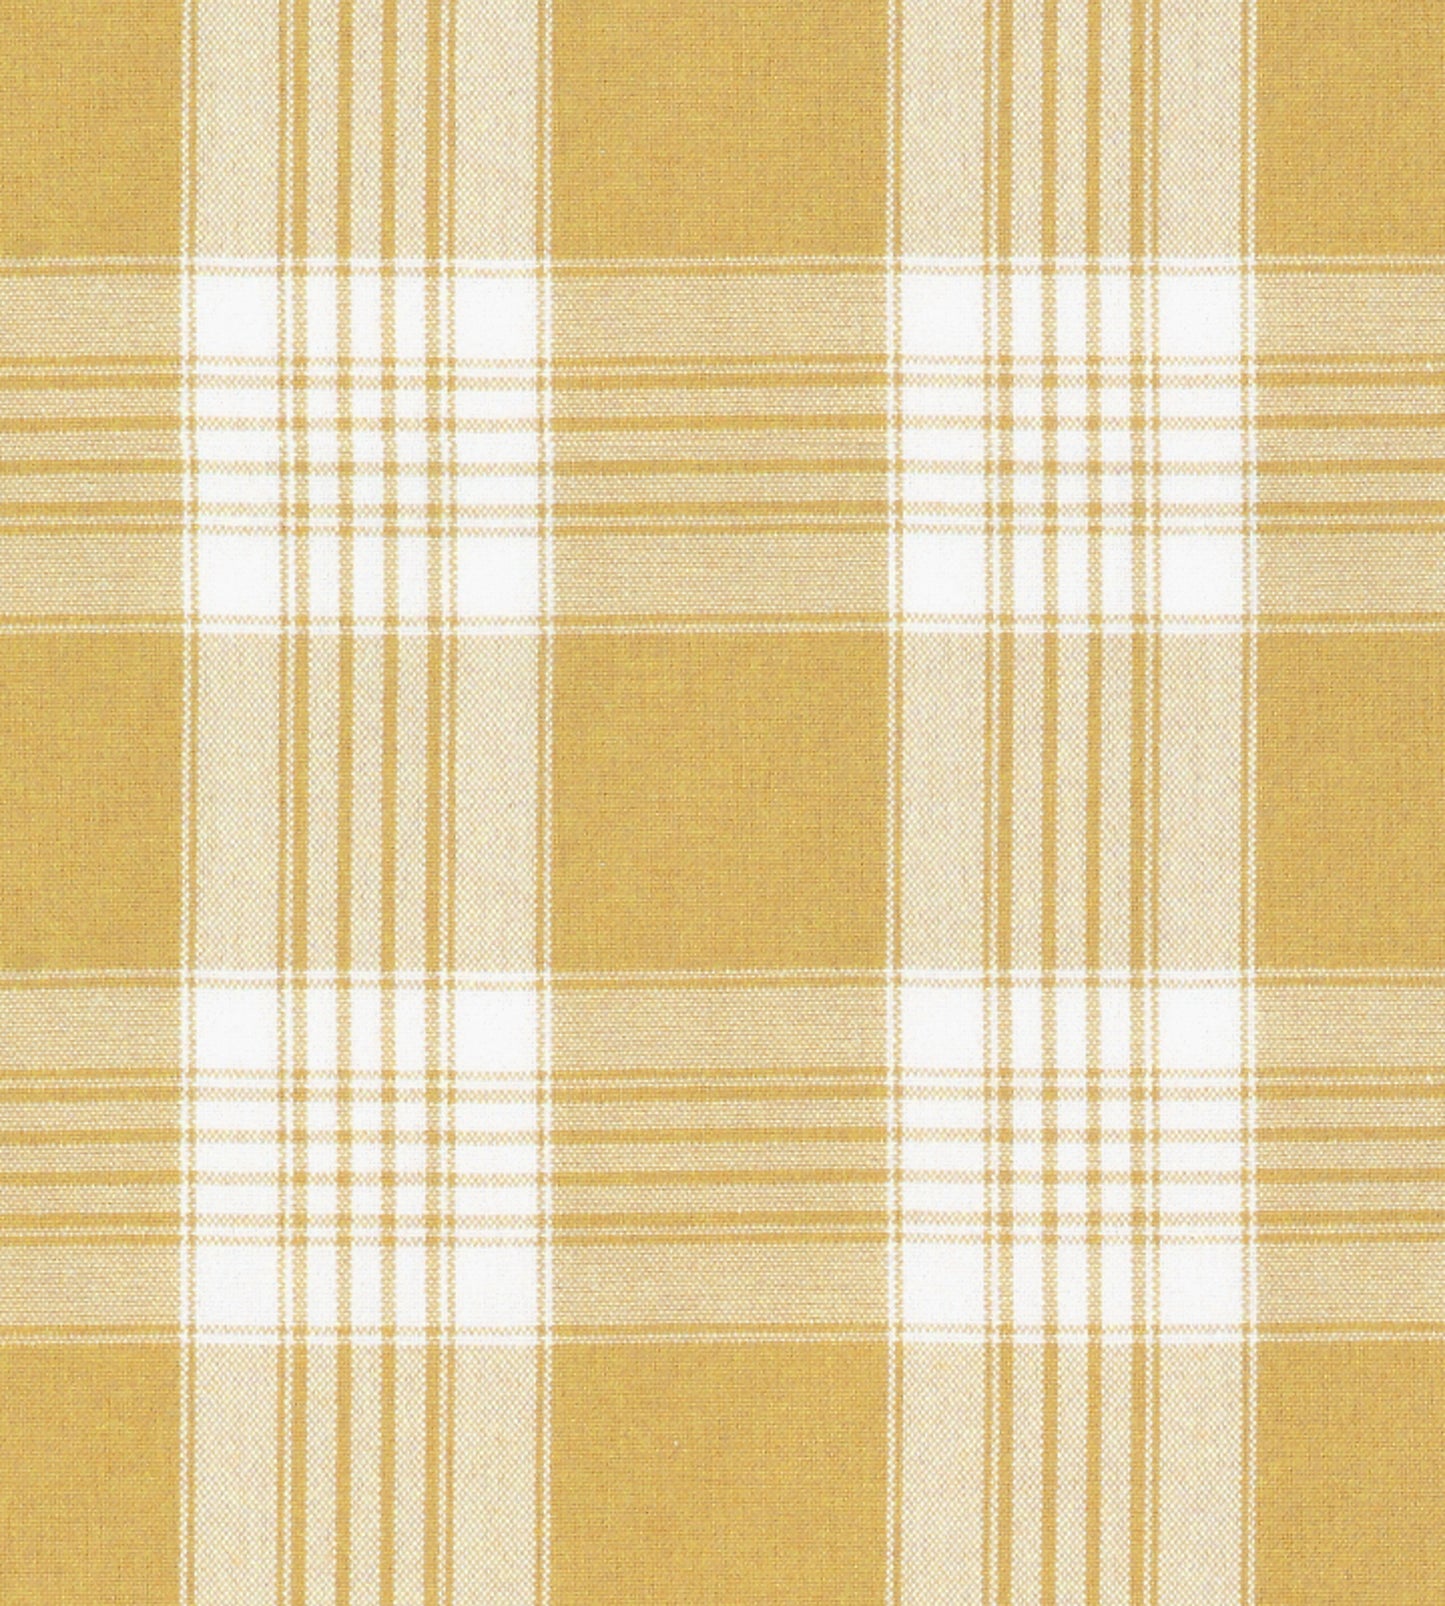 Purchase Old World Weavers Fabric Pattern number F3 00033020, Poker Plaid Goldenrod 1